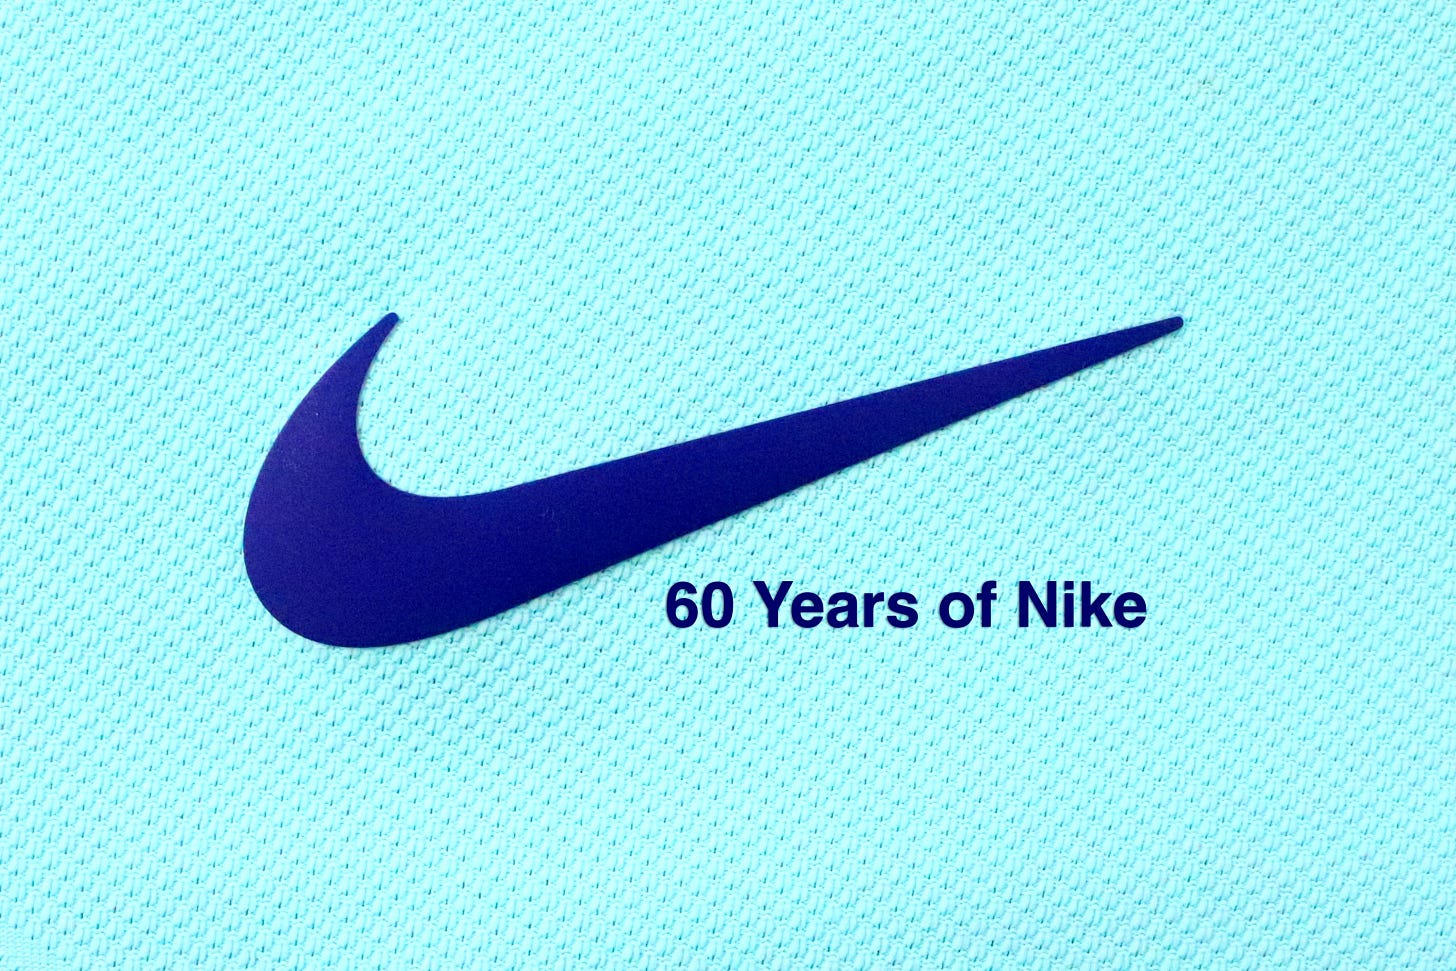 60 years ago Nike was founded!